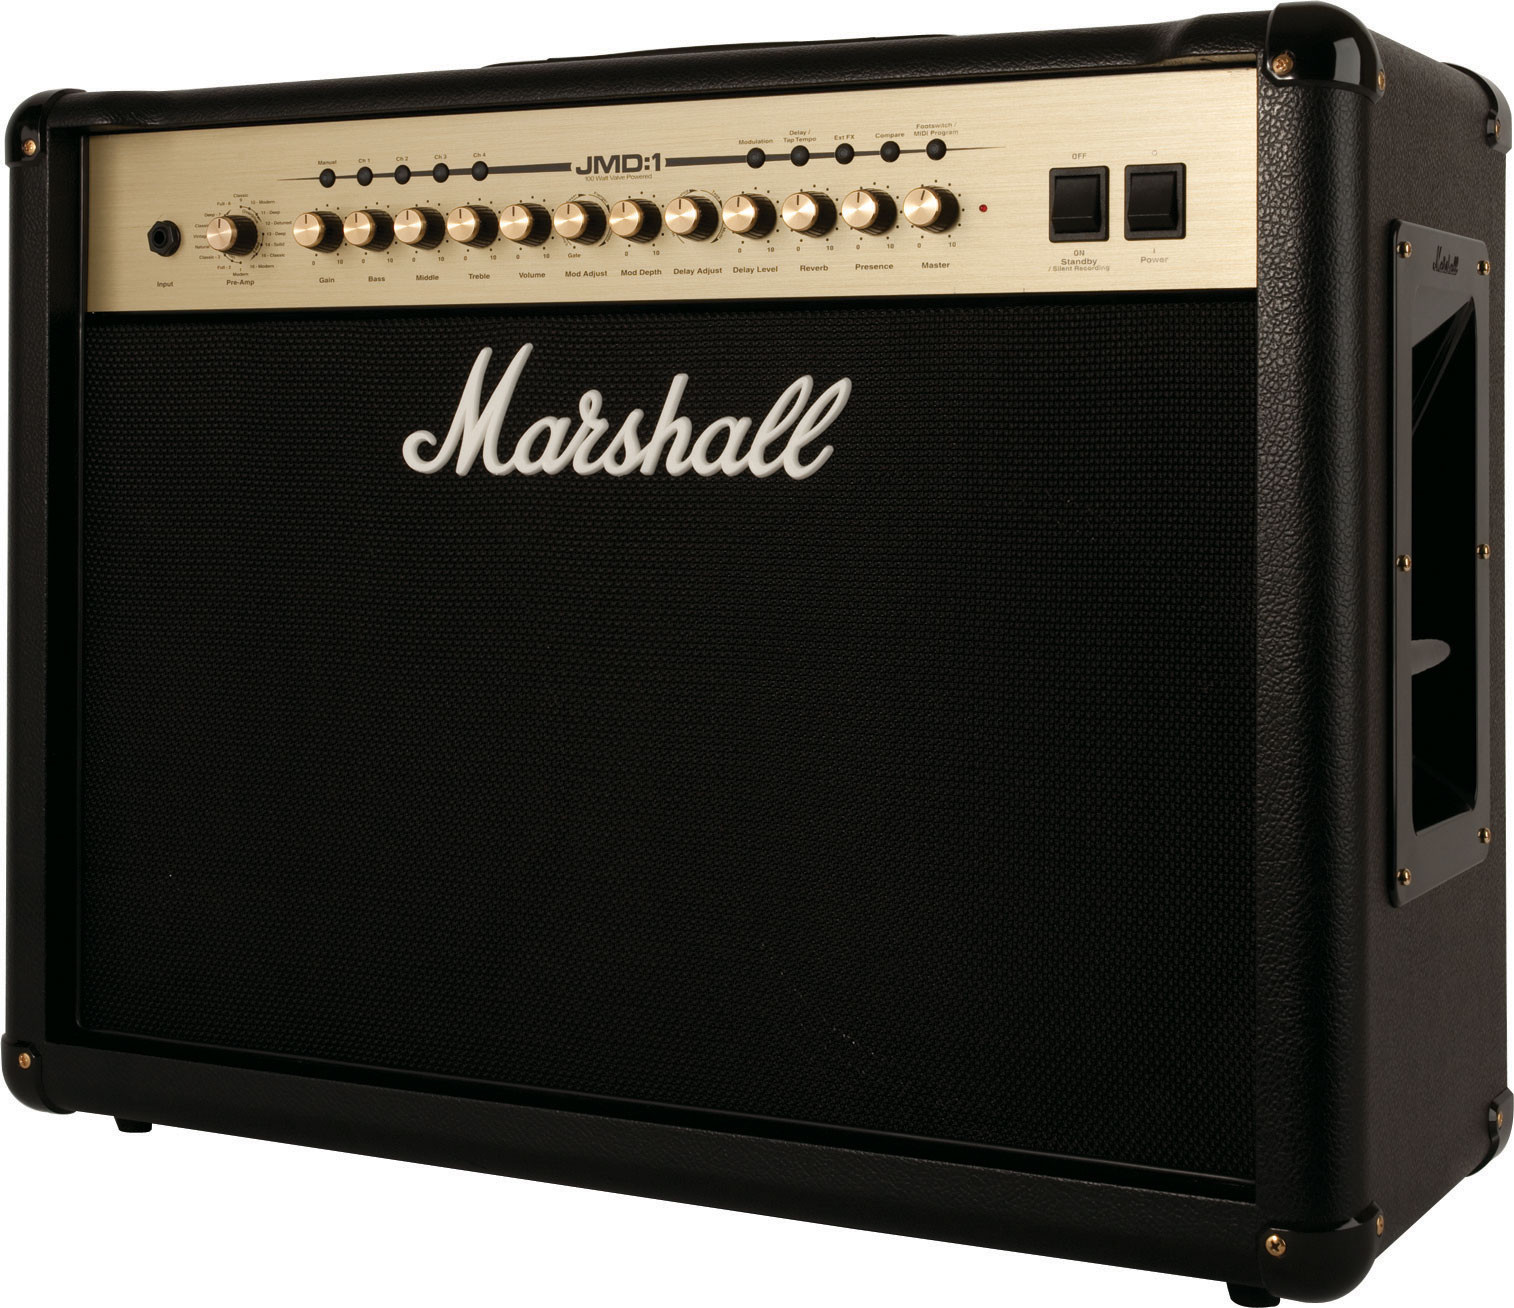 Marshall Electric Guitar Amp Amplifier For iPhone 4 4S 5